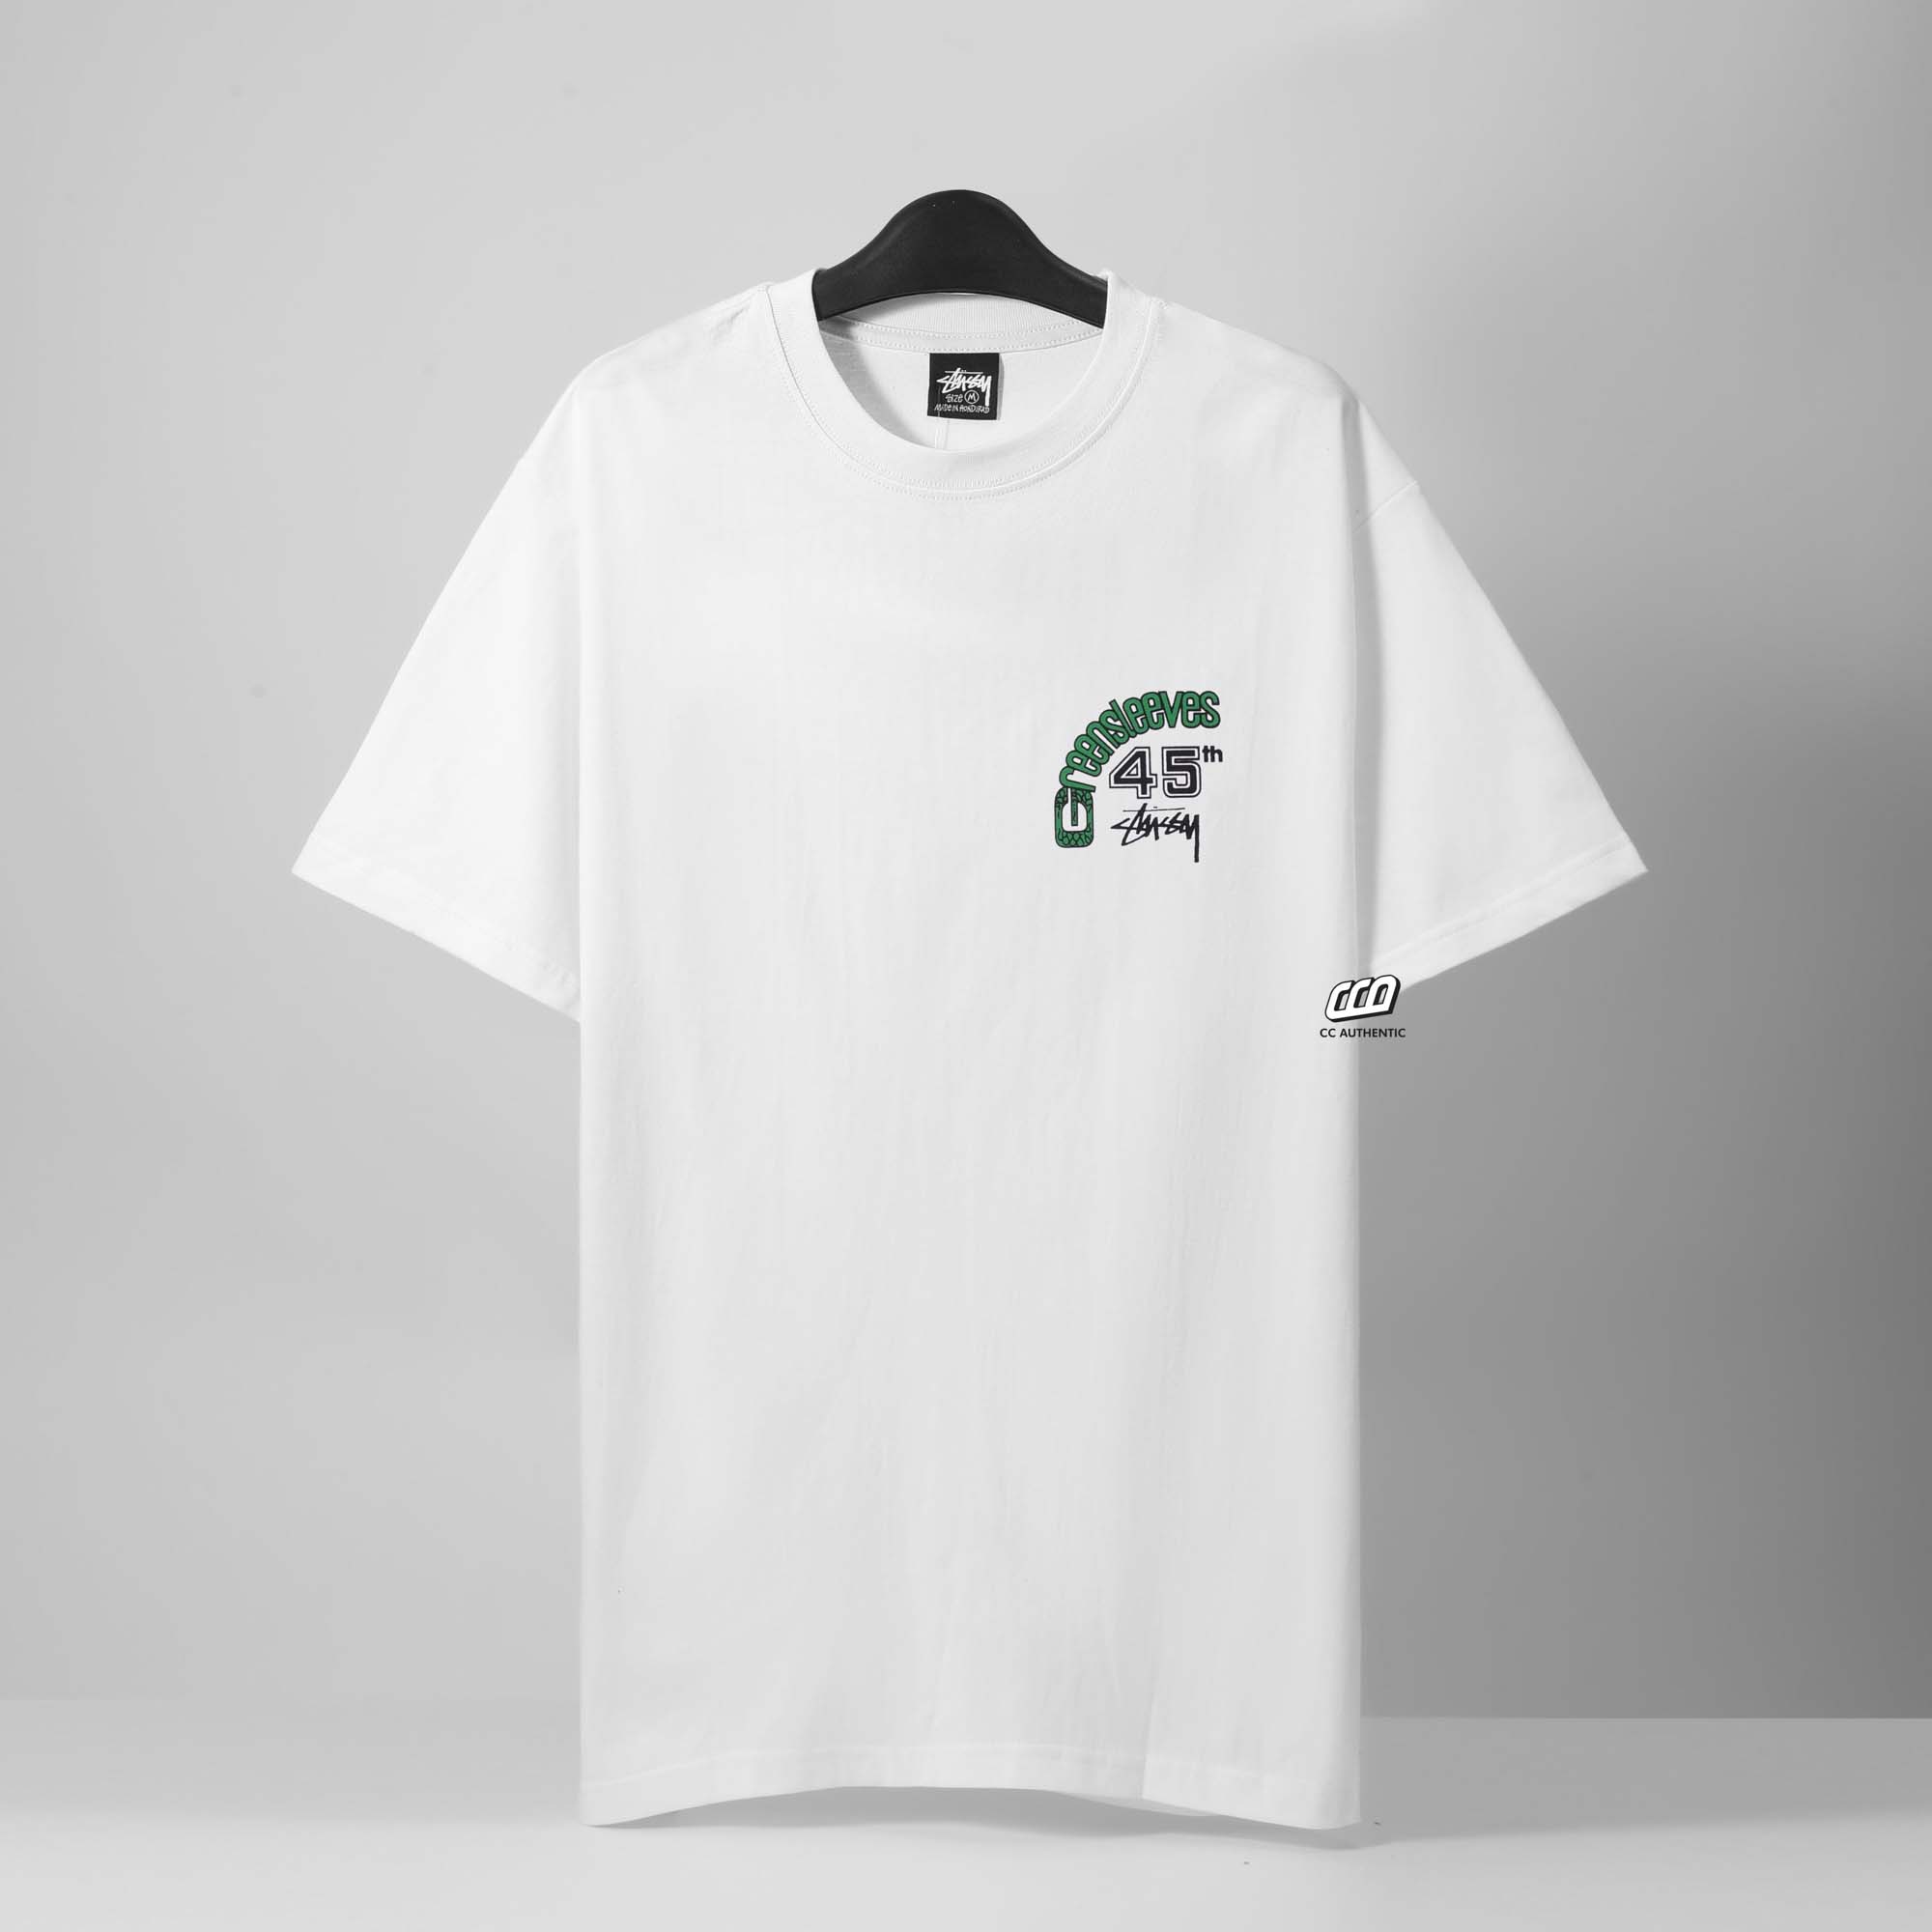 STUSSY x GREENSLEEVES RECORDS 45 T-SHIRT - WHITE